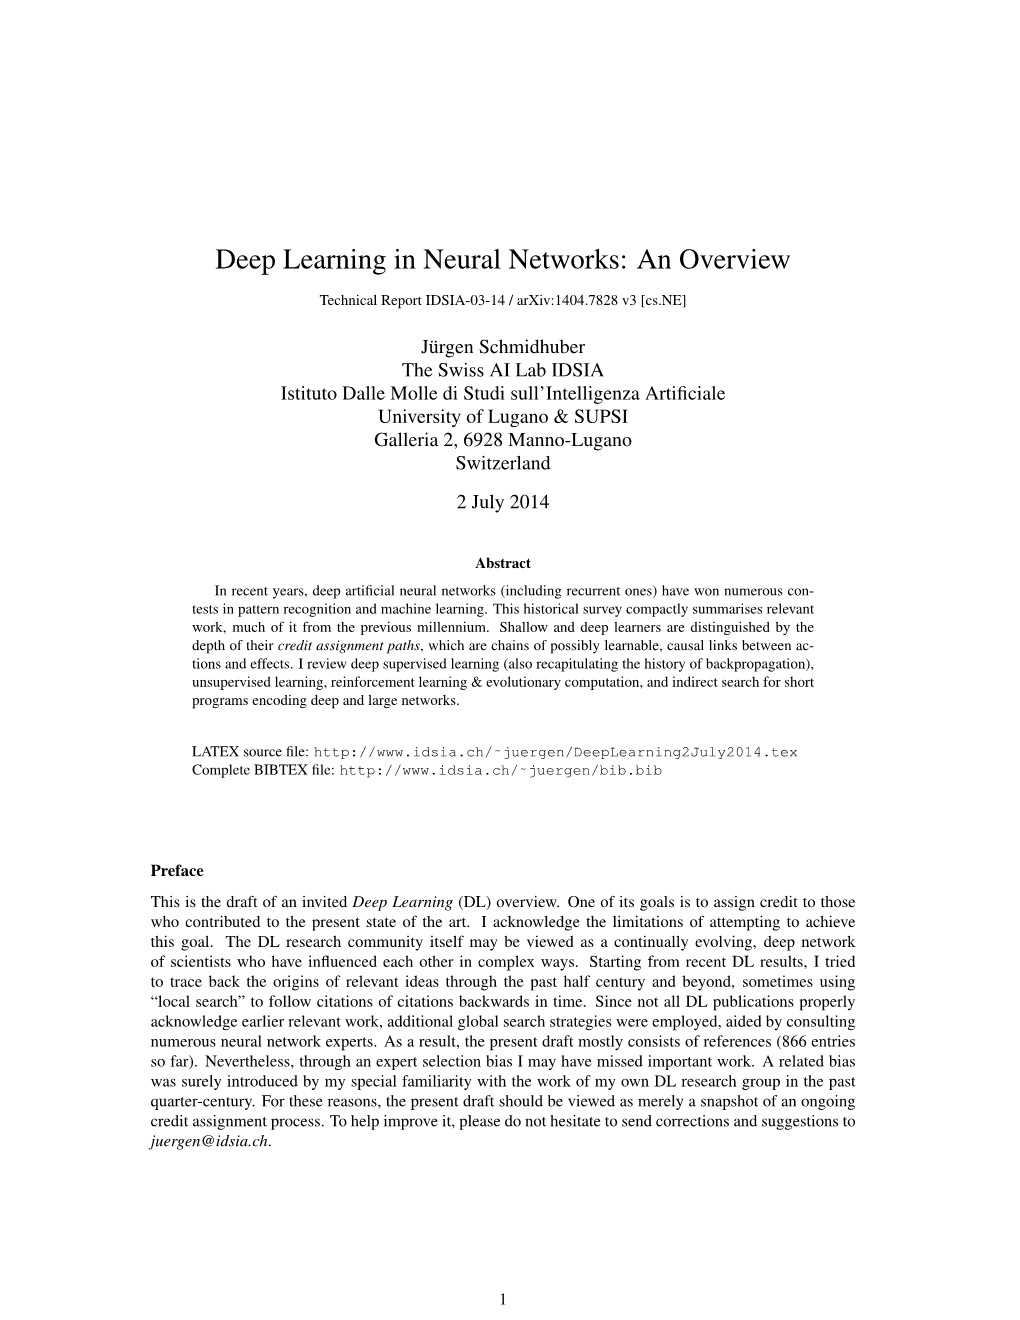 Deep Learning in Neural Networks: an Overview